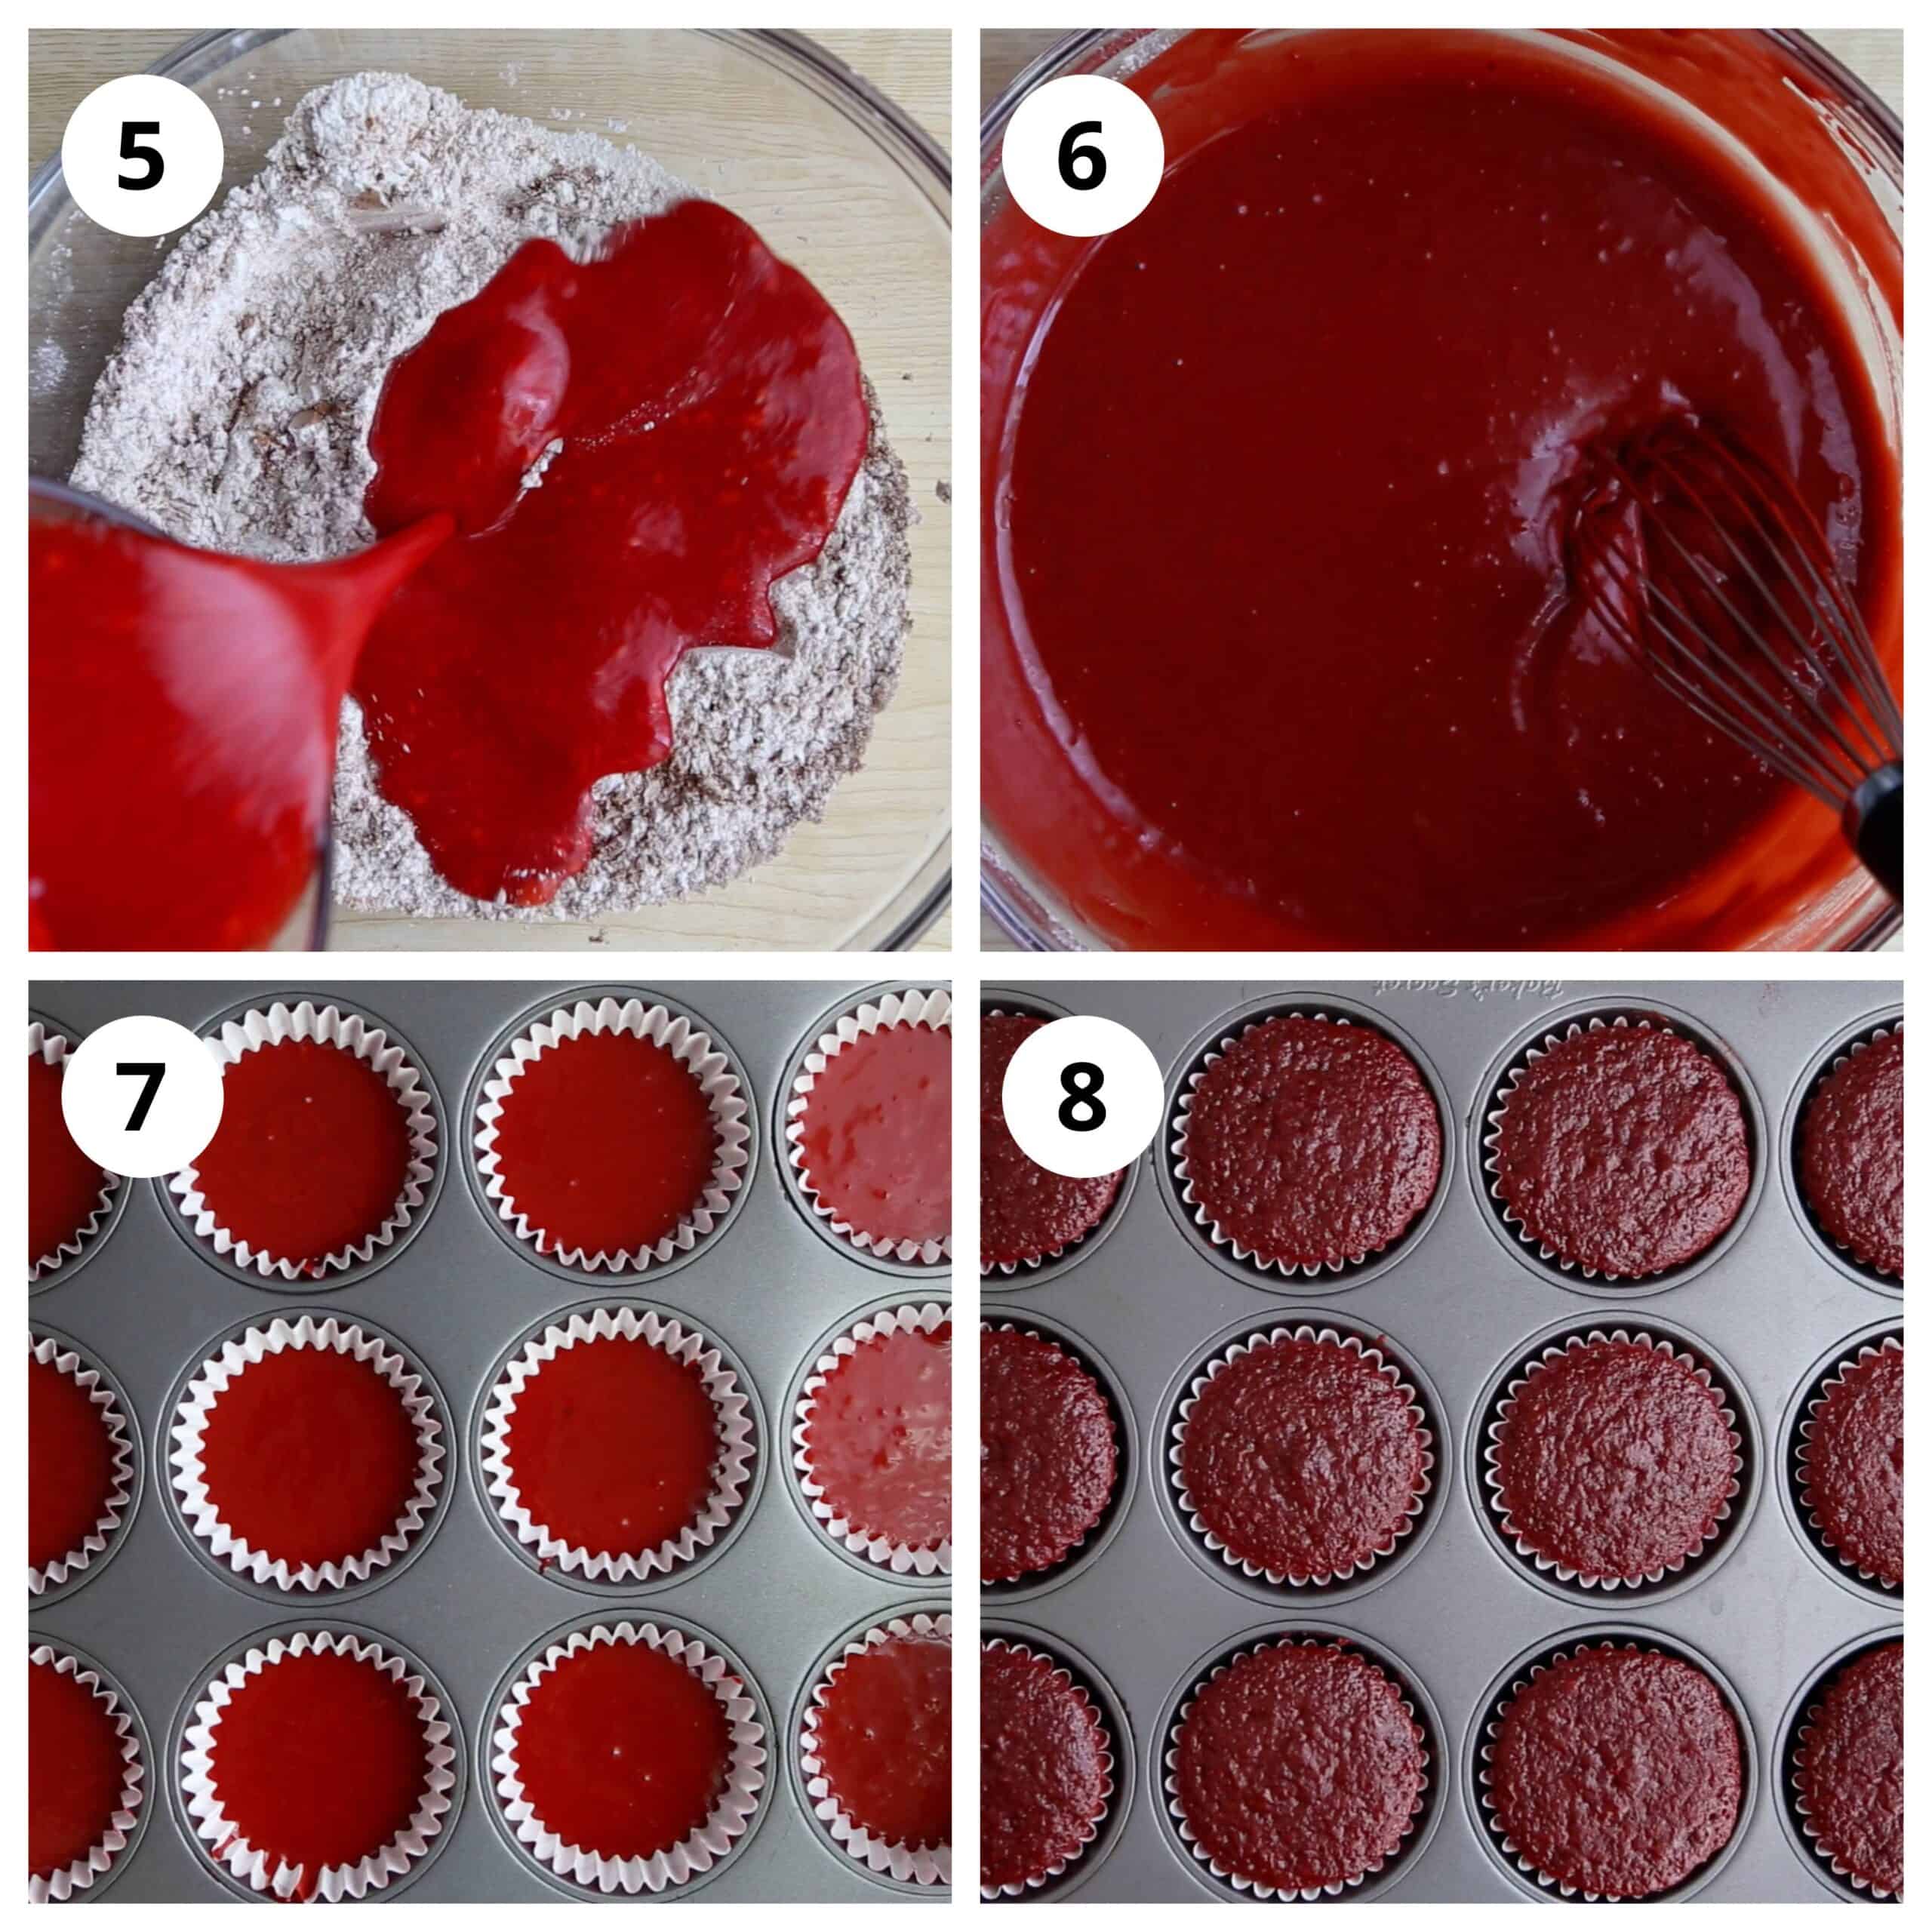 Steps to mix the dry and wet ingredient, pour the batter and bake the cupcakes